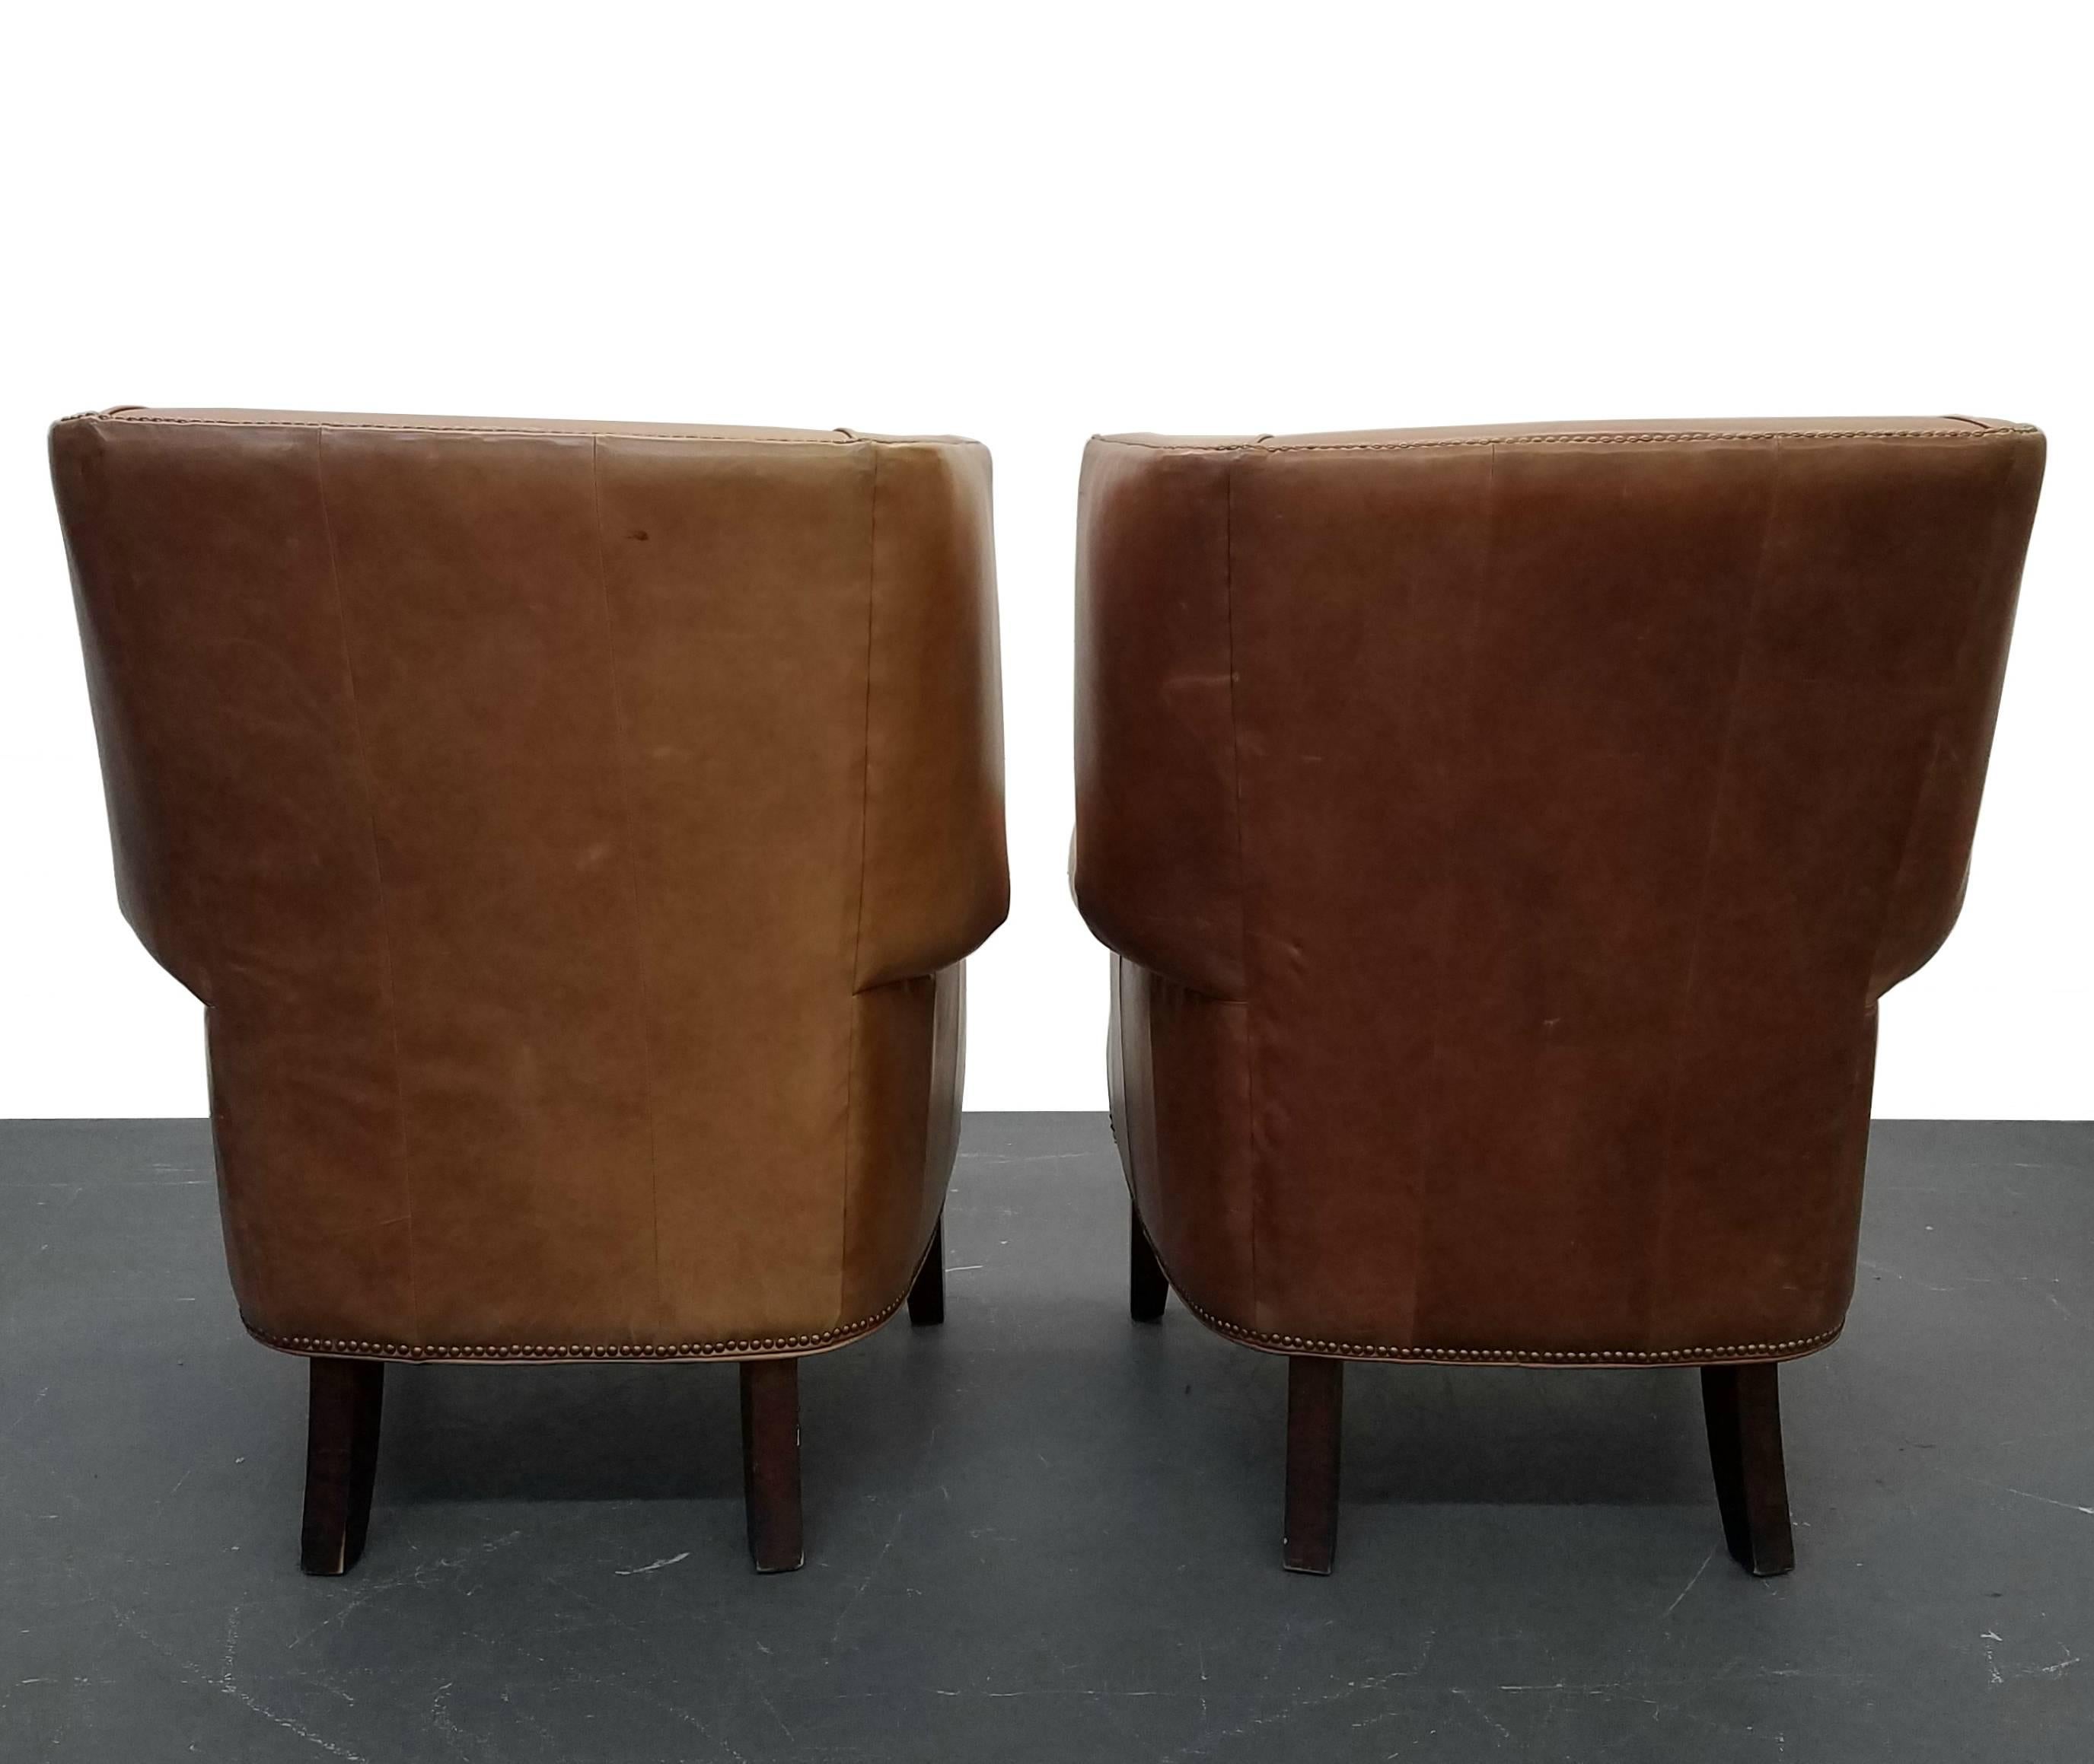 Pair Of Oversized Vintage Leather Wingback Chairs For Sale At 1stdibs